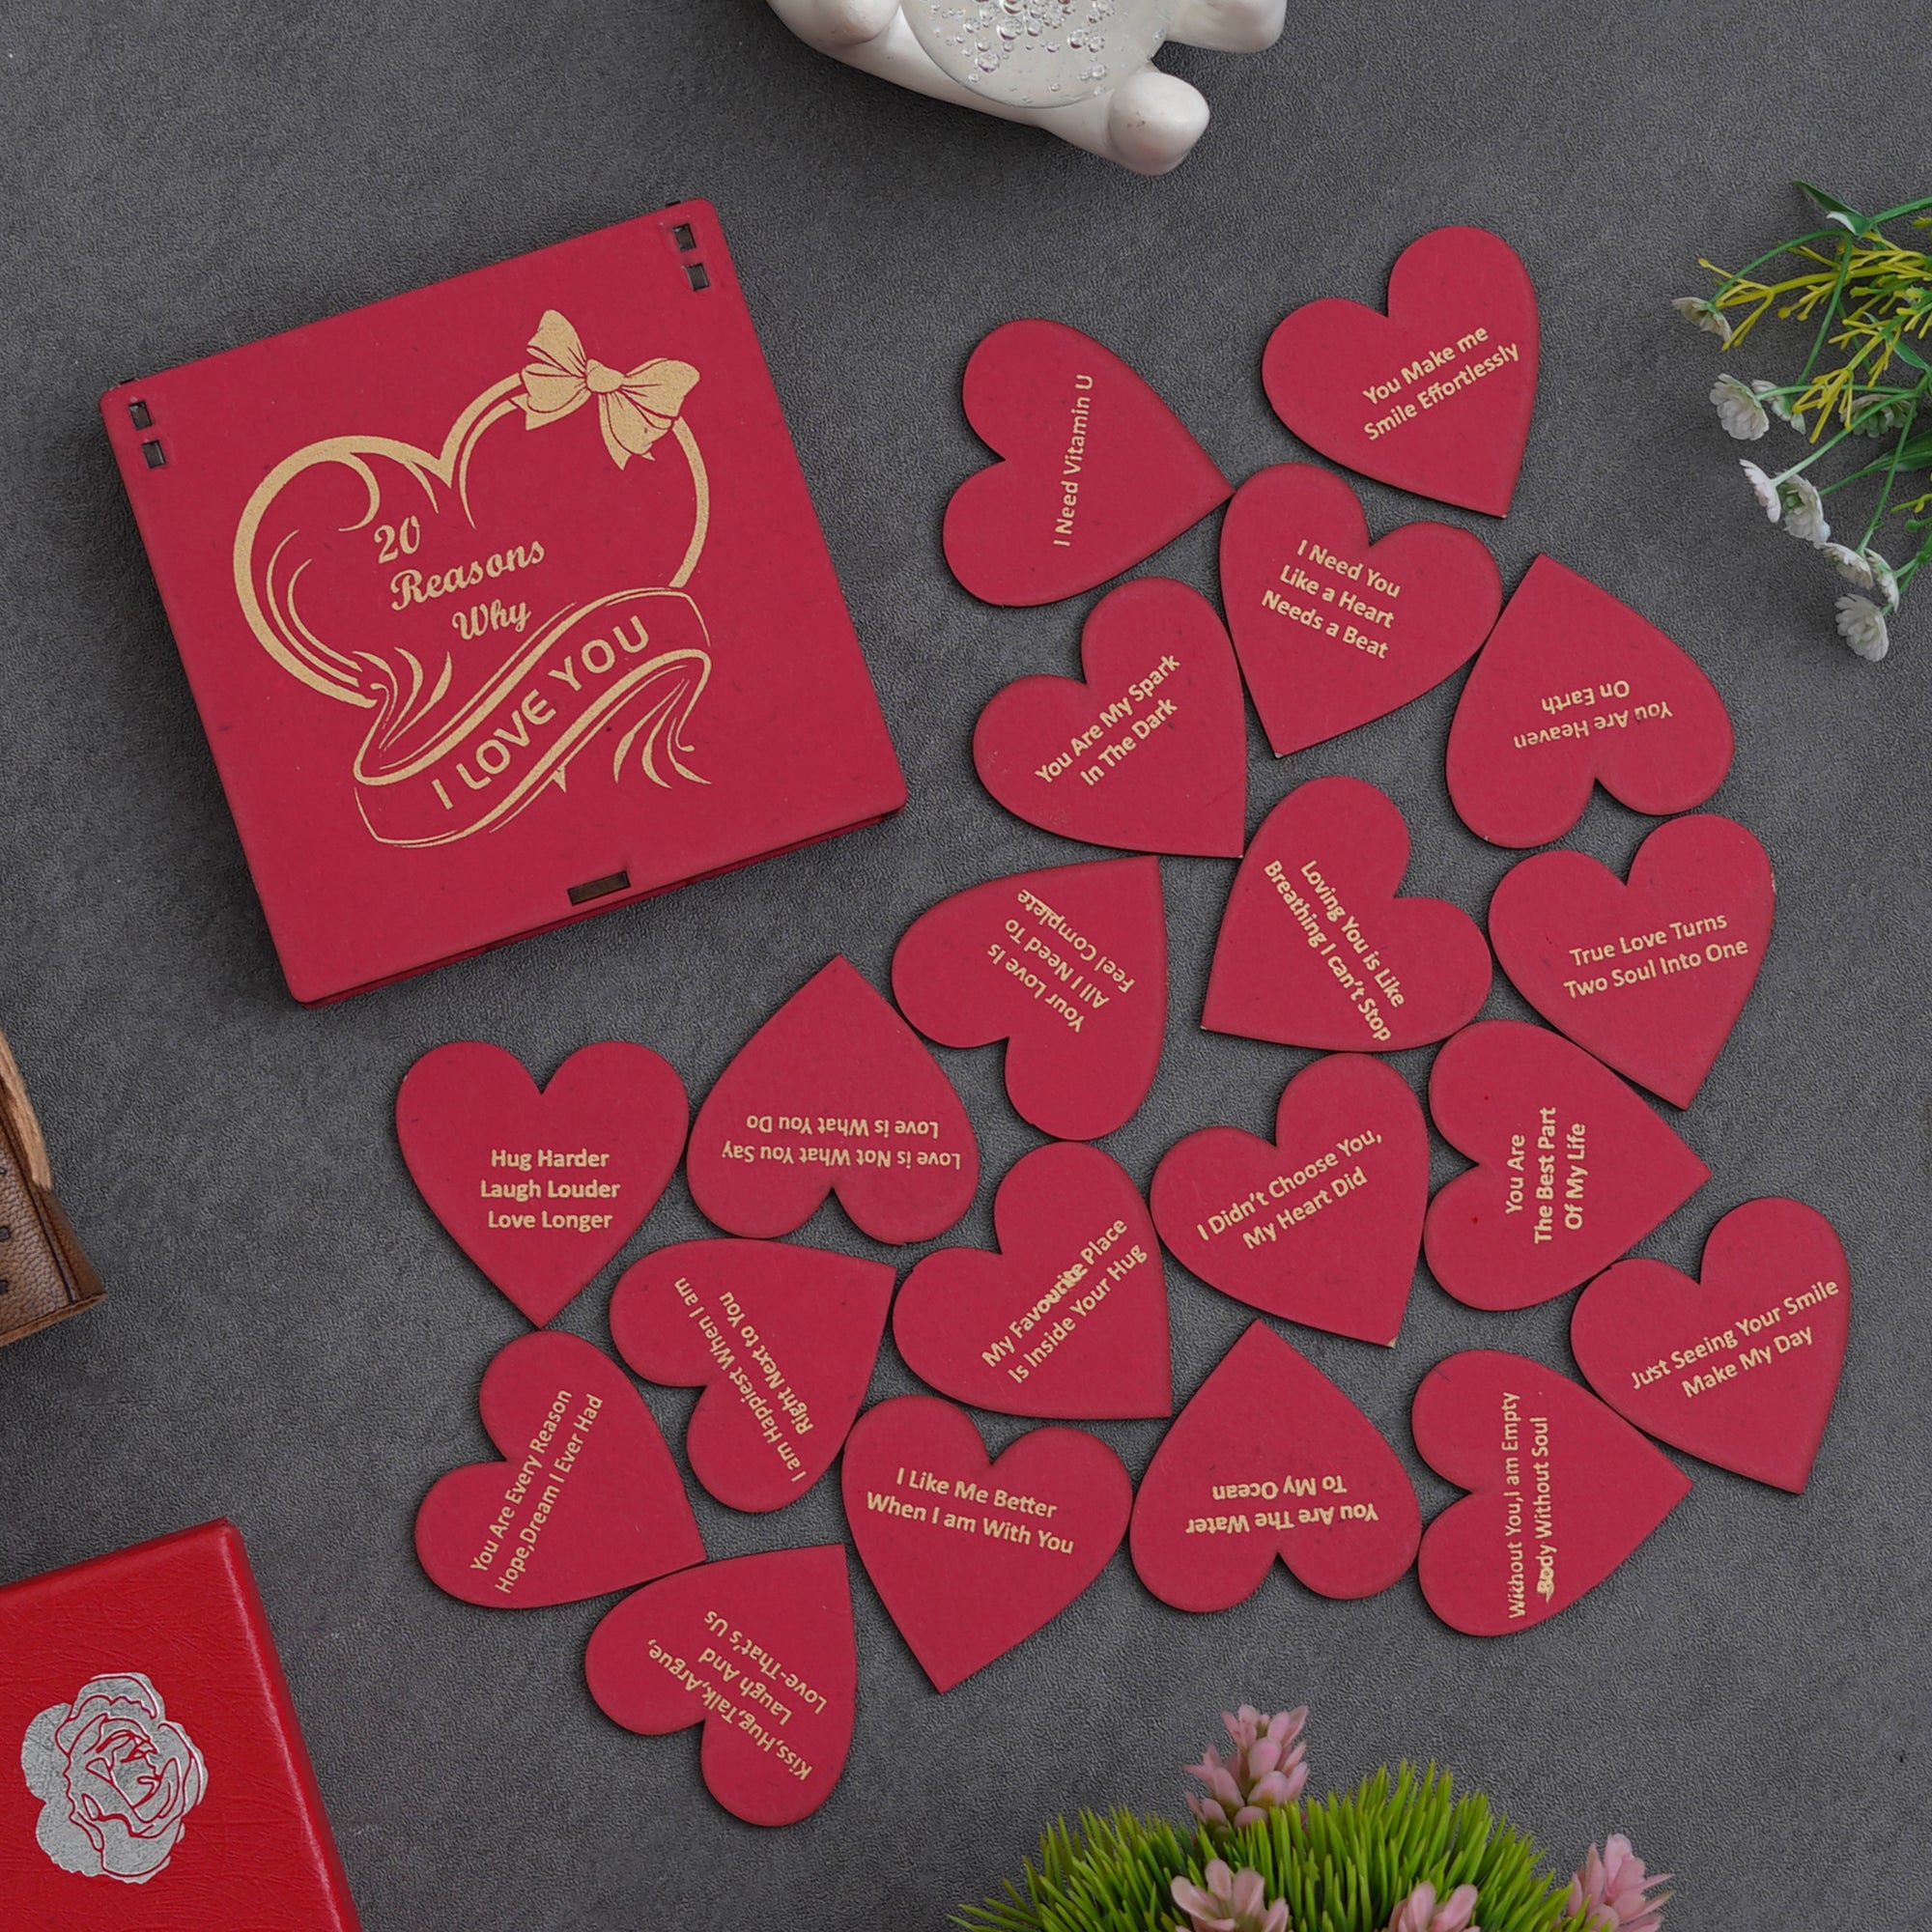 Valentine Combo of Pack of 12 Love Coupons Gift Cards Set, "20 Reasons Why I Love You" Printed on Little Red Hearts Decorative Wooden Gift Set Box 3